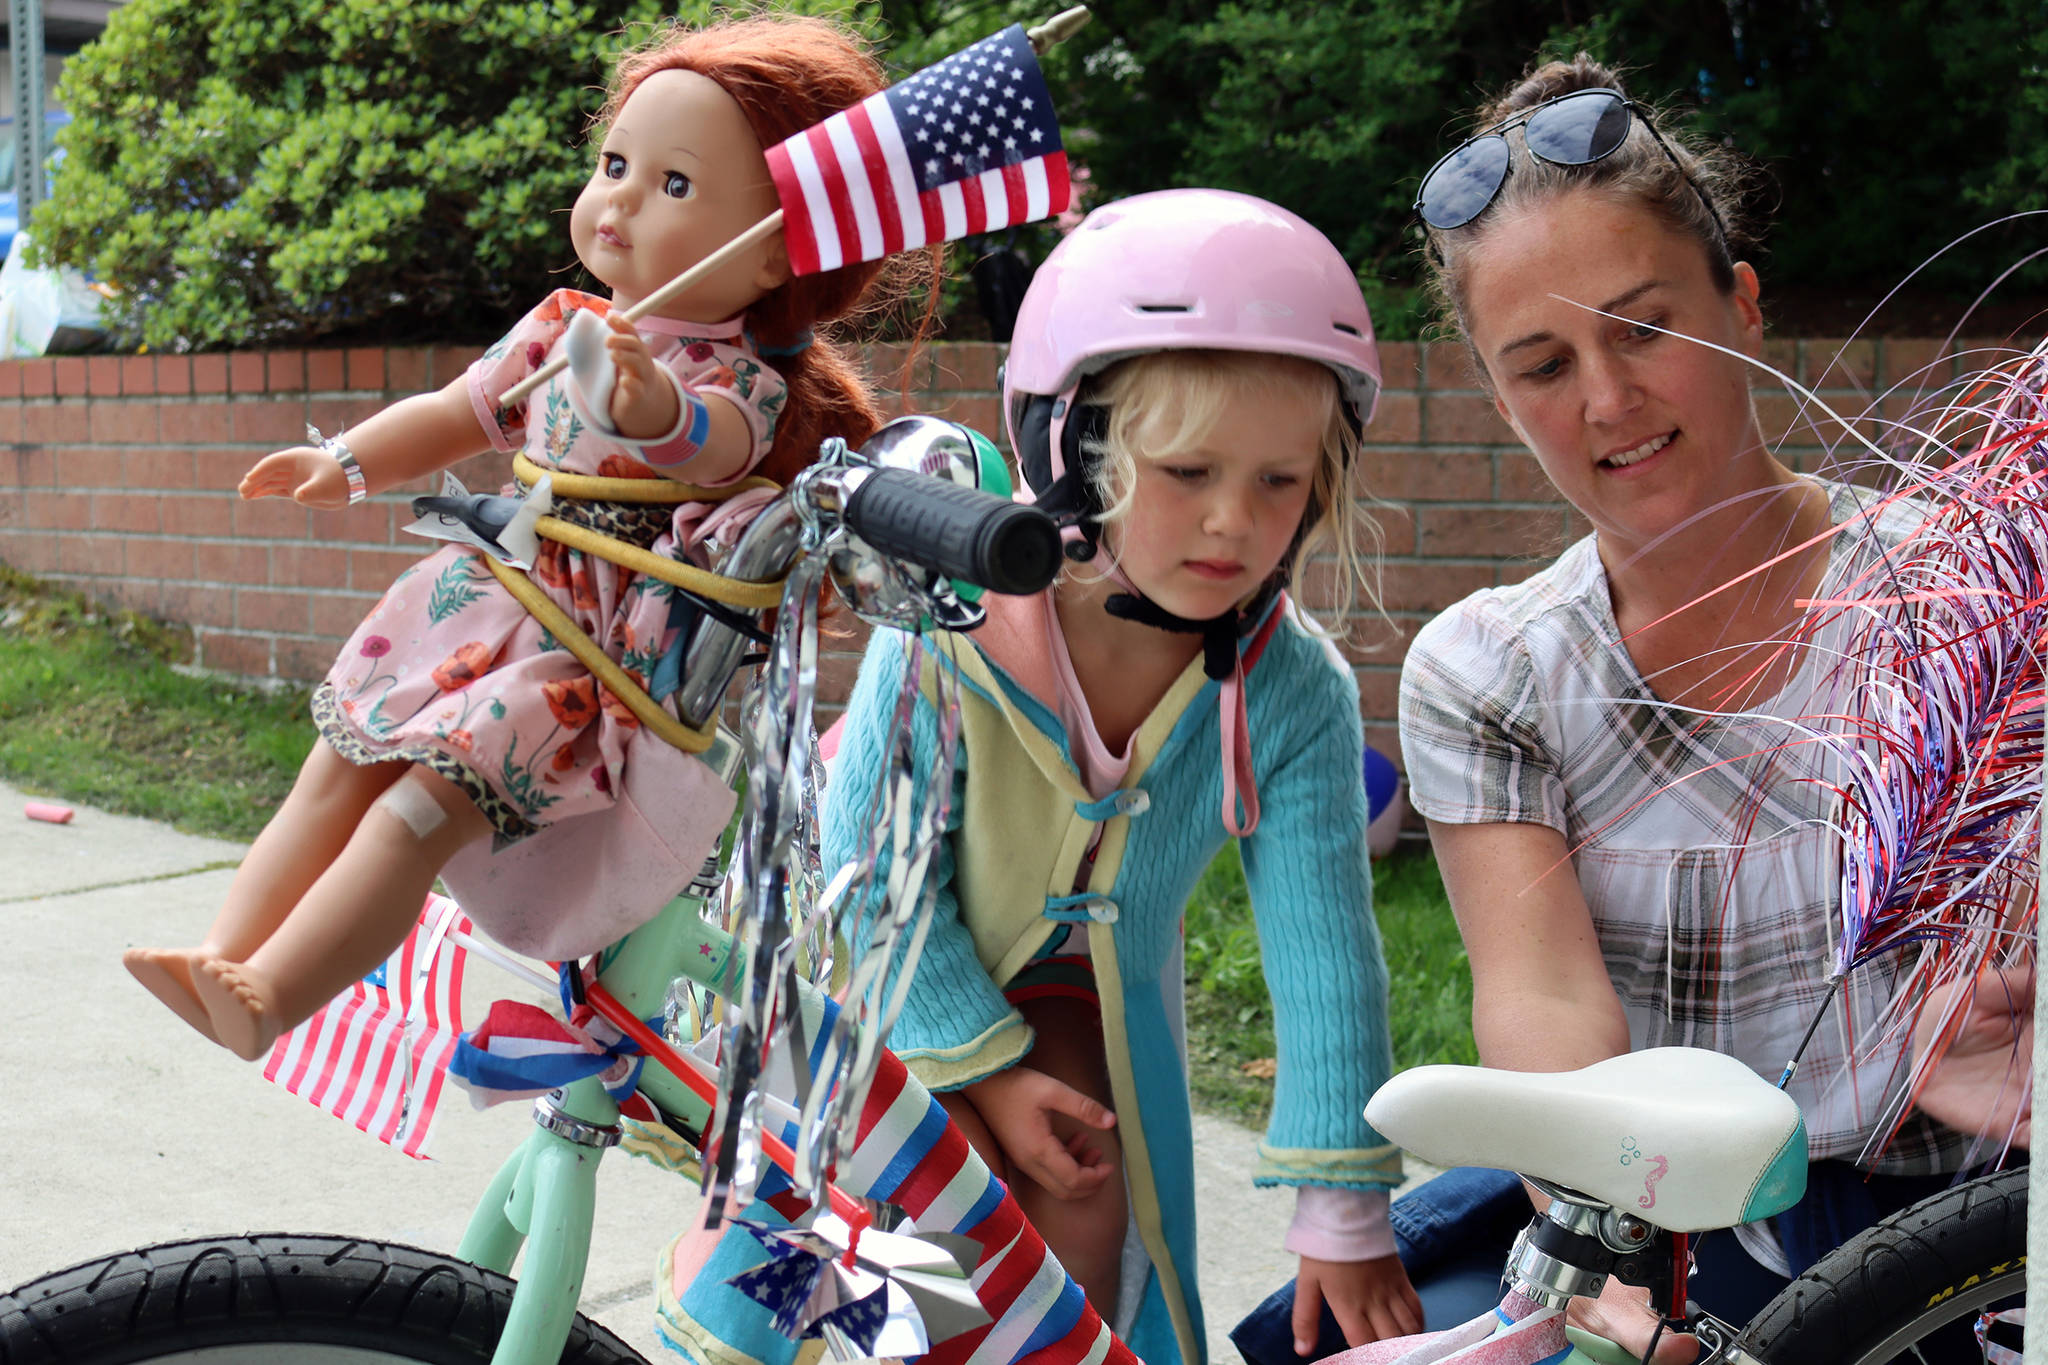 Imogen Resneck, 4, and Jamie Buehner finish up decorating a bike outside the Douglas Public Library on July 3, 2021. Resneck’s doll, Robbie, was bound to the bike like an amber-haired figurehead because “she wanted to go to the parade,” Resneck said. (Ben Hohenstatt / Juneau Empire)